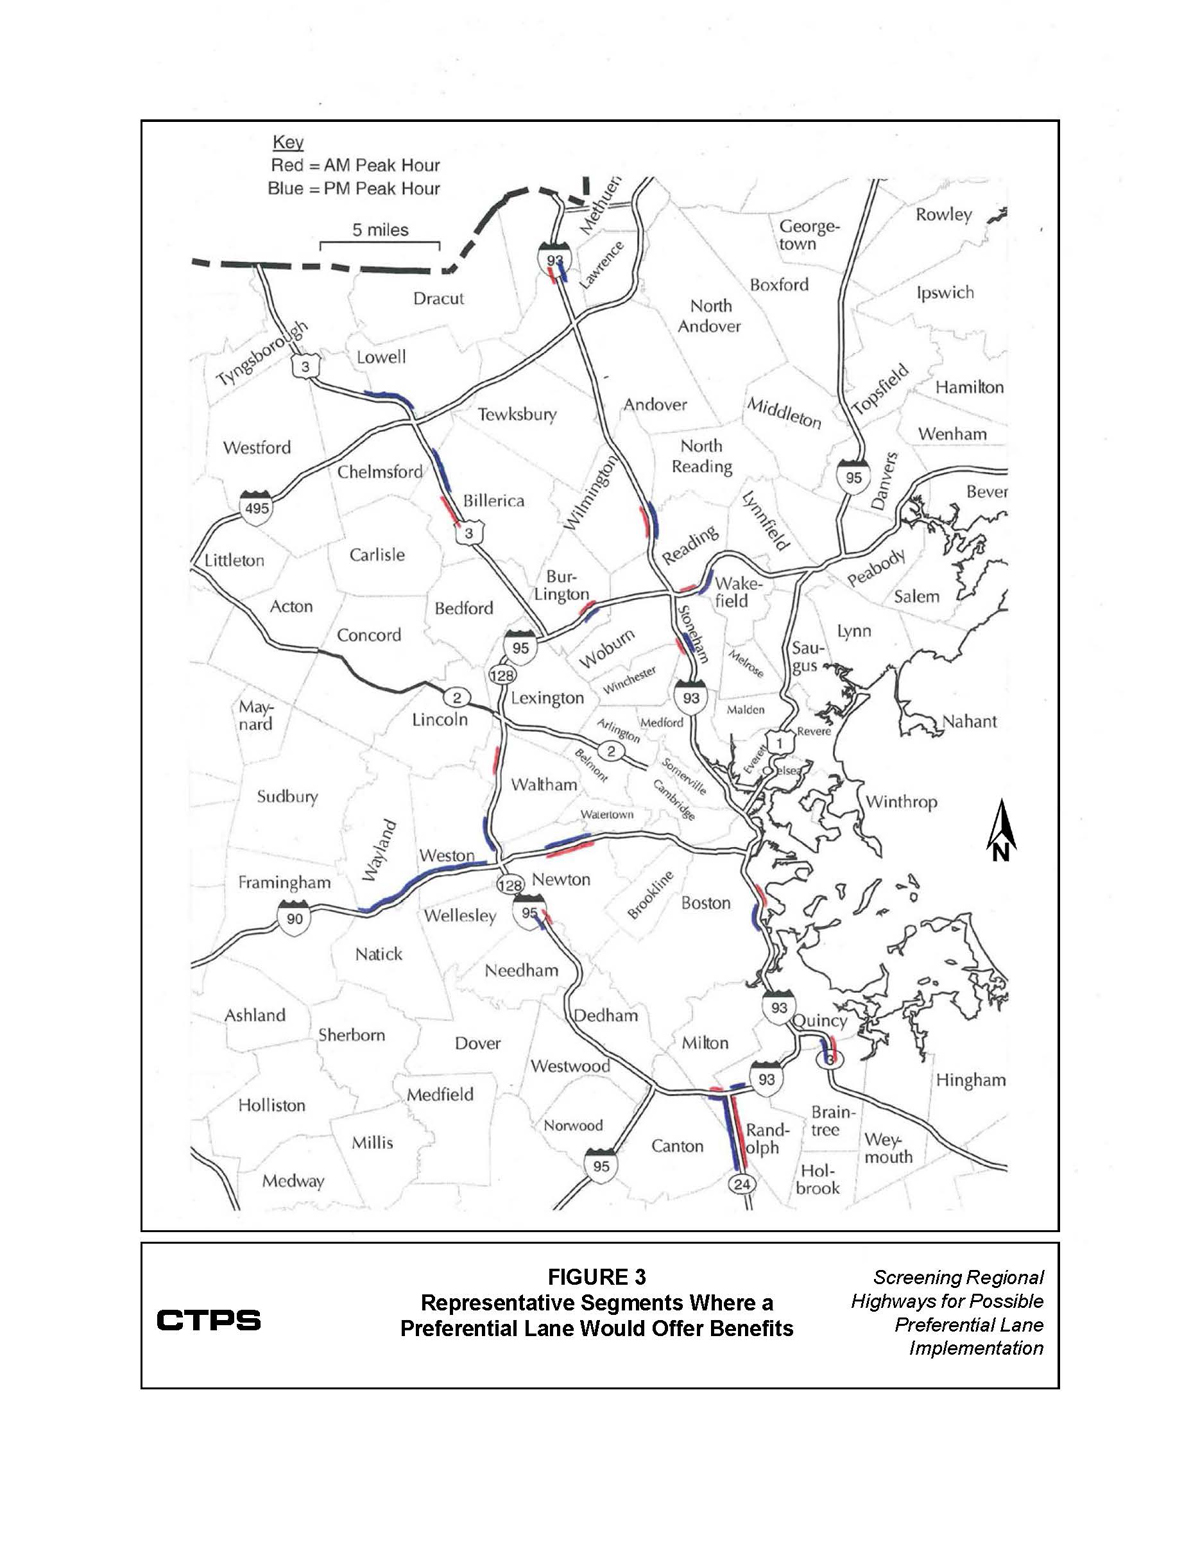 Figure 3 is a map of a portion of eastern Massachusetts extending from New Hampshire to Randolph, south of Boston. All express highways where a preferential lane was calculated to offer user benefits are located within this portion of eastern Massachusetts. The candidate congested segments are highlighted.